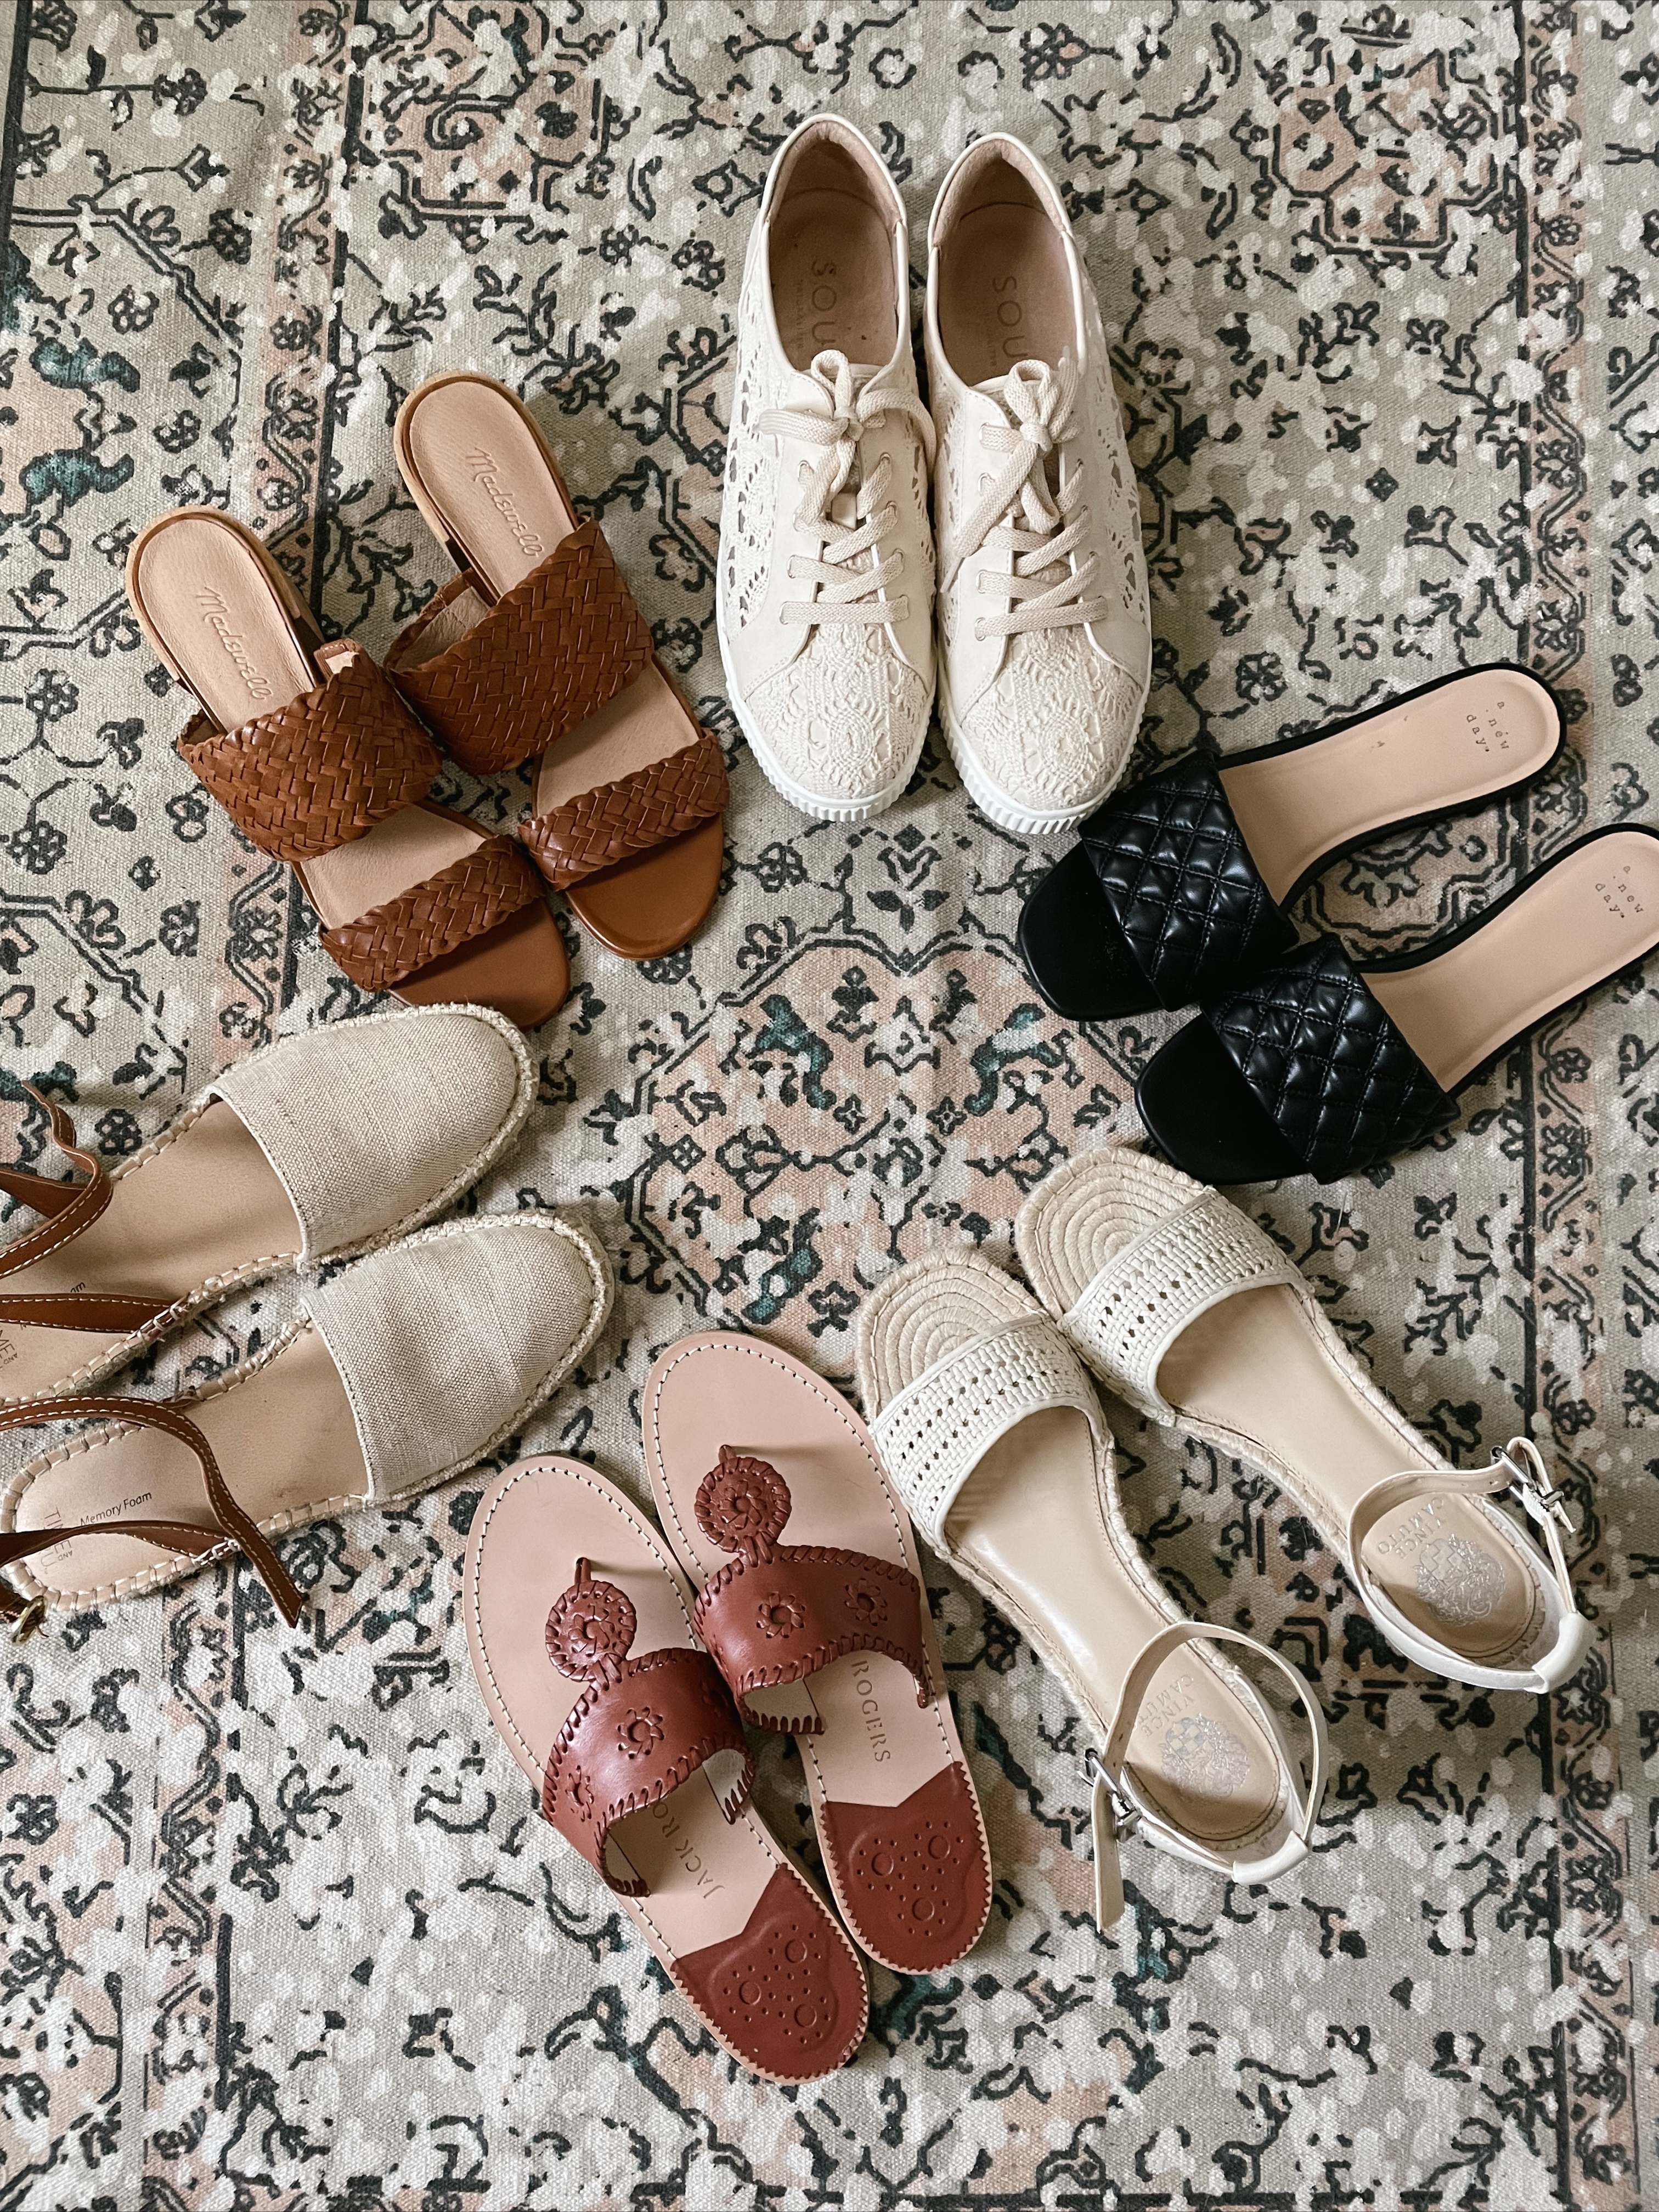 Shoe Trends of Summer 2021 - Best Shoe Trends 2021 - Spring and Summer Shoe Trends 2021 - Affordable by Amanda